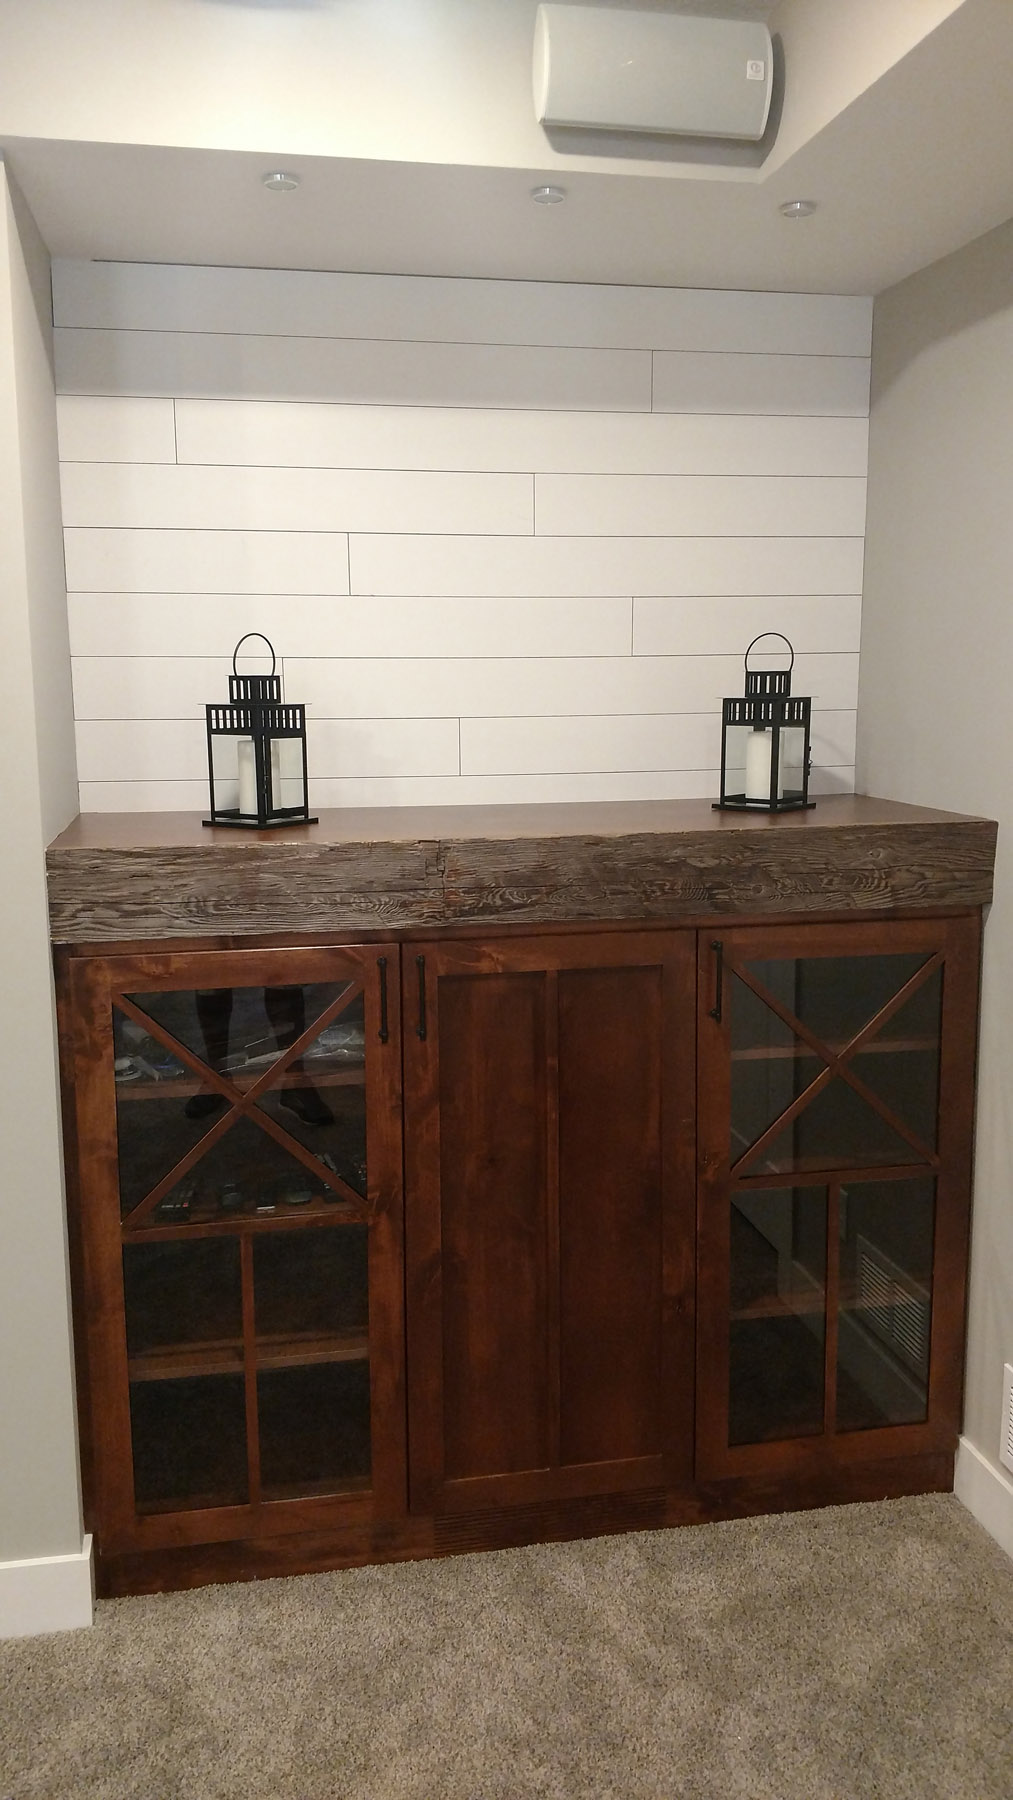 Knotty Alder cabinets w/ one of a kind grids